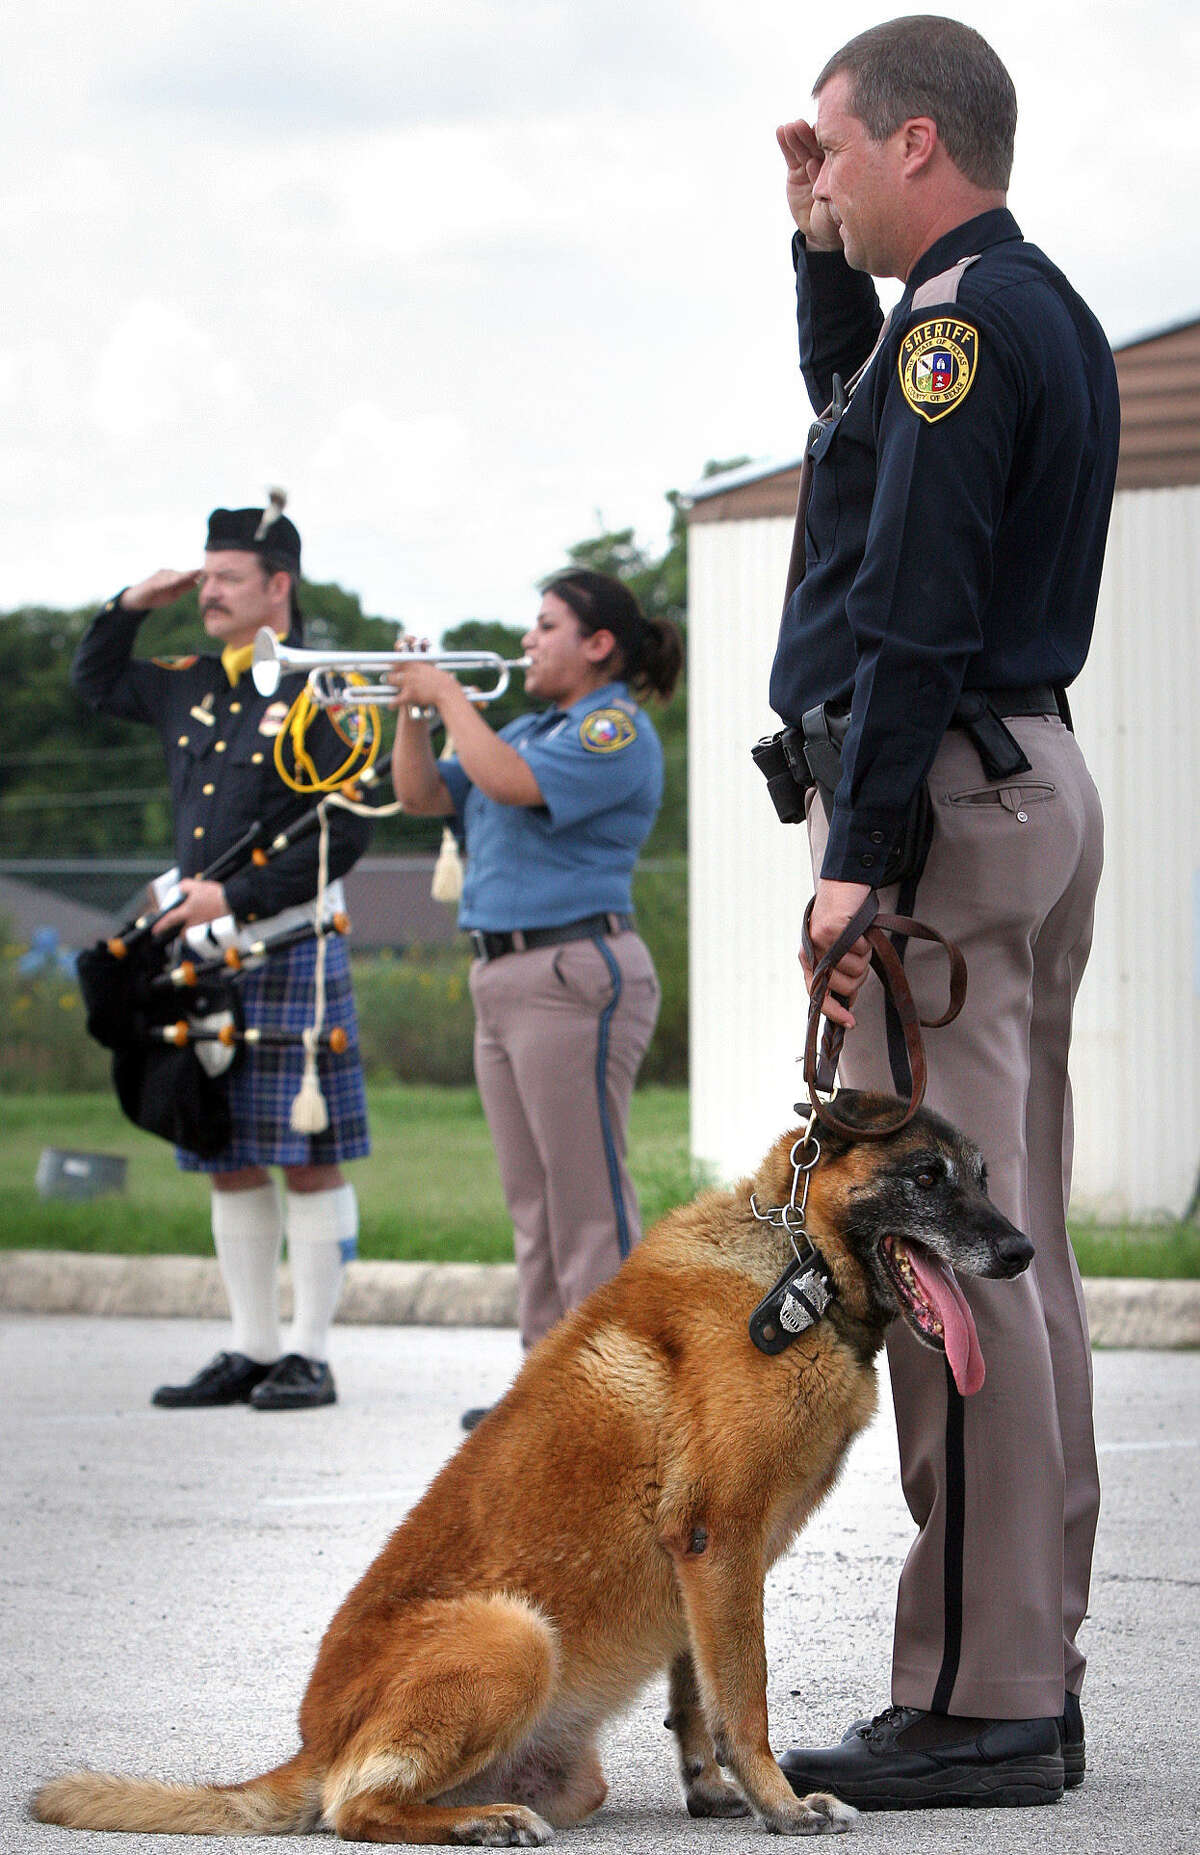 Deputy Steve Benoy (right) of the Bexar County Sheriff K9 Unit is shown at a police dog's 2007 memorial service. He now has been indicted for the heat exhaustion deaths of two police dogs after allegedly leaving them in a hot patrol vehicle overnight.